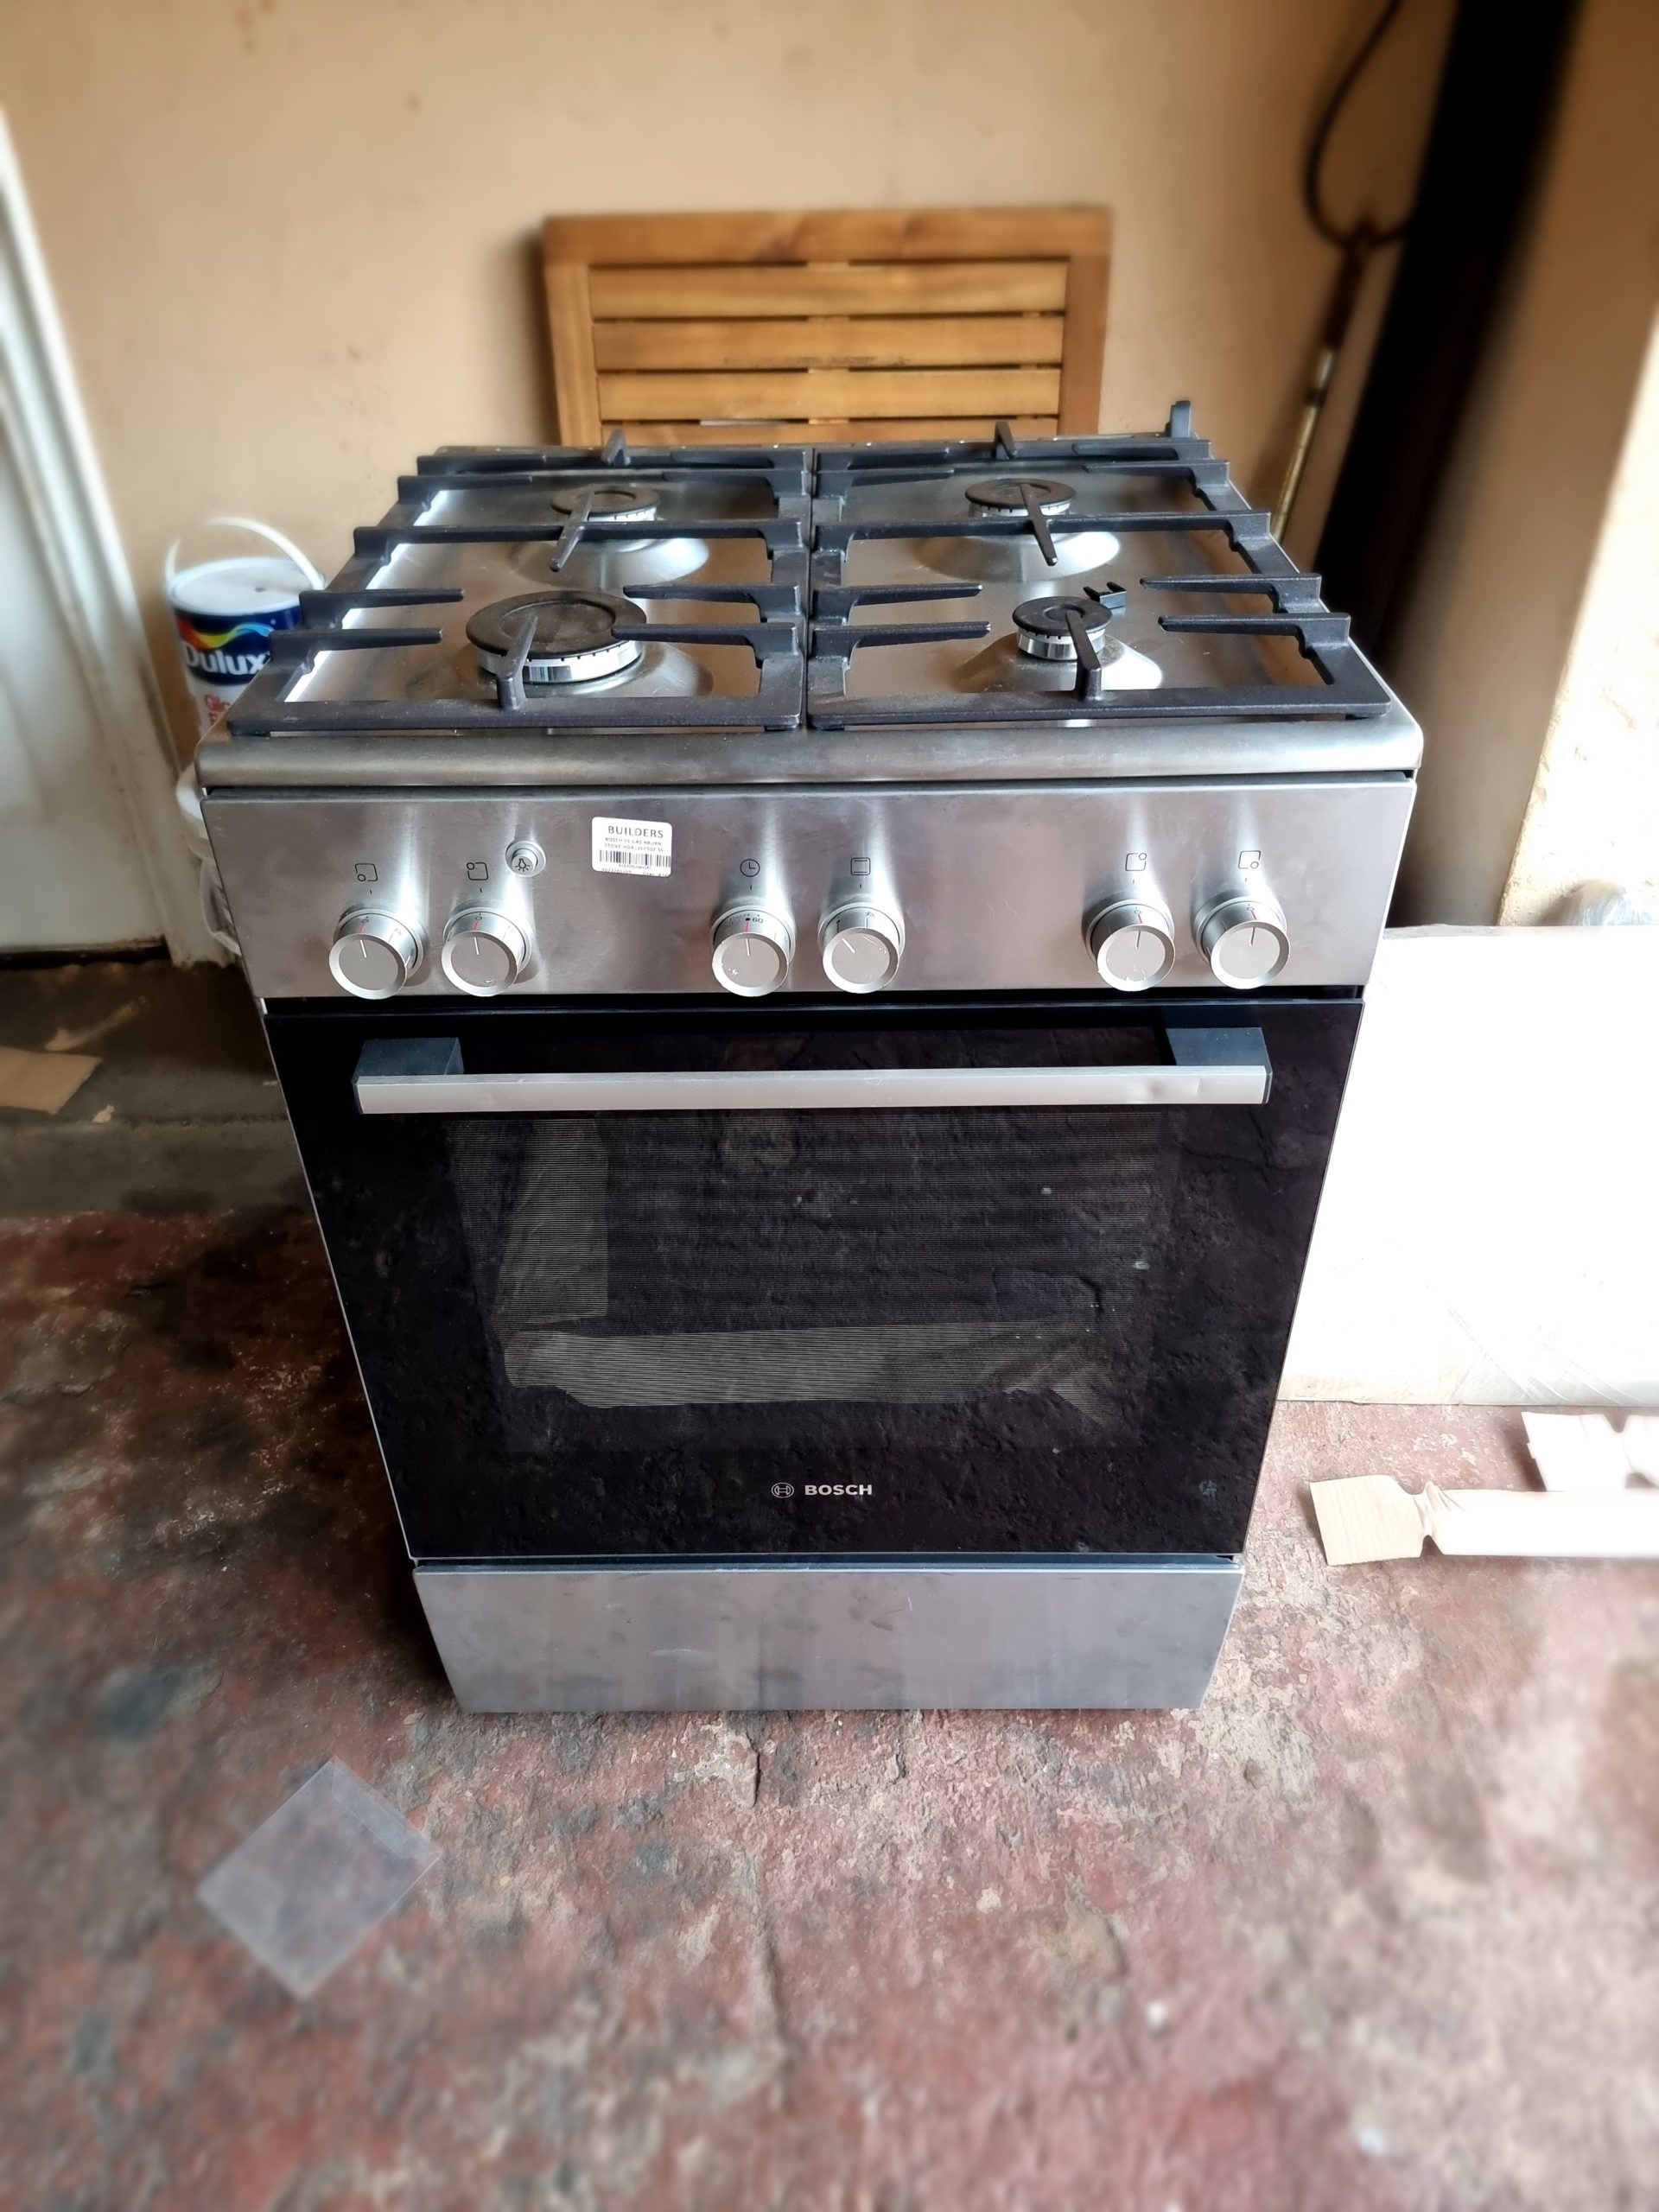 Bosch 4 Gas Burner Stove HGA120E50Z (Retail R 9 999) – Perfect working condition, top glass broken, fittings included for repairs